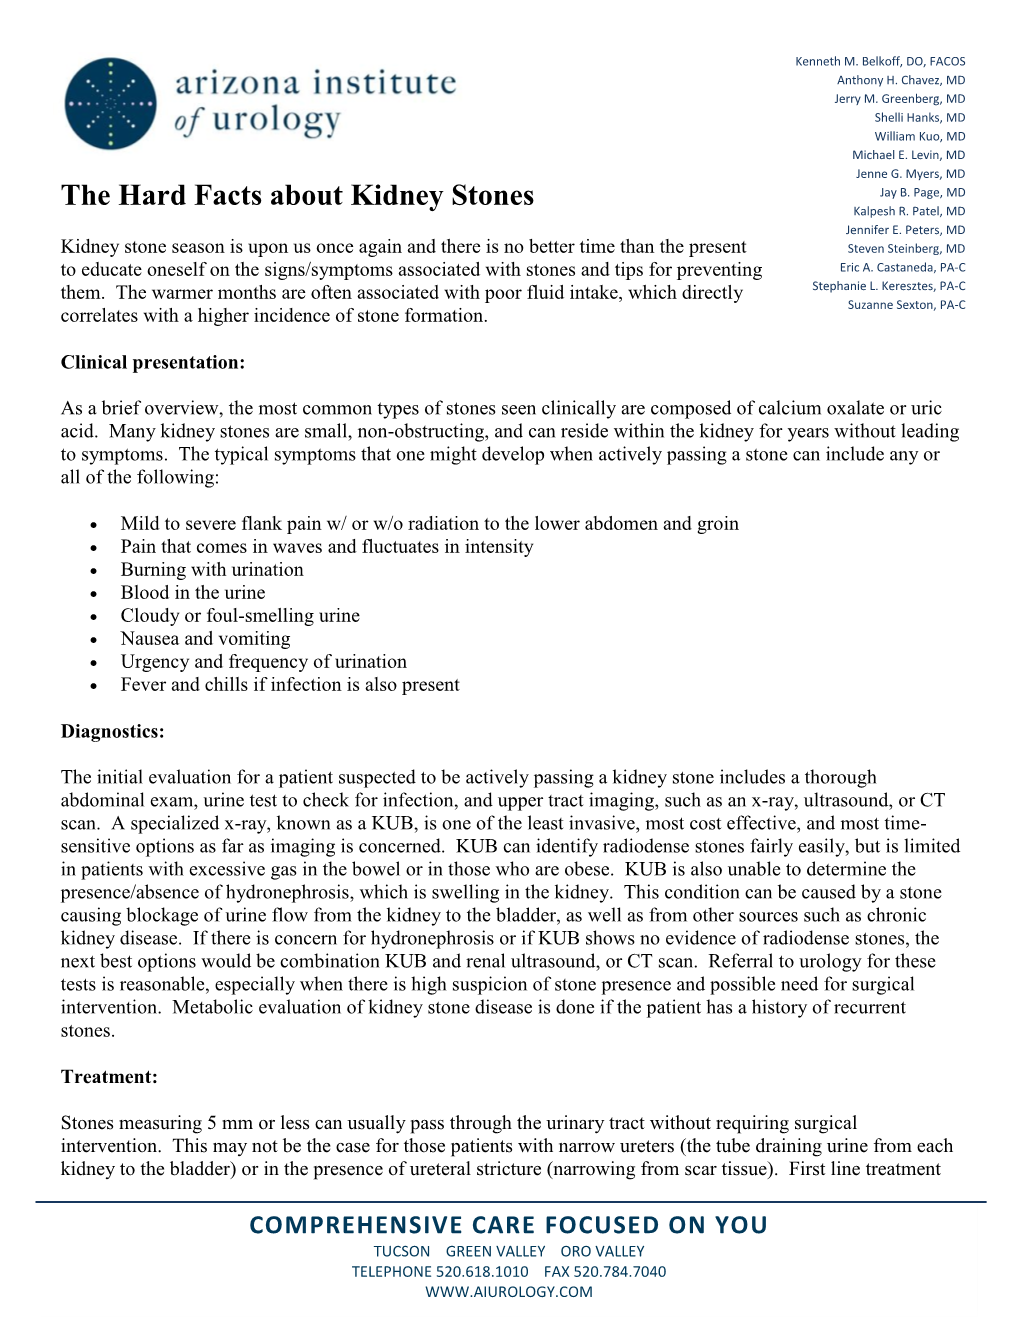 The Hard Facts About Kidney Stones Jay B